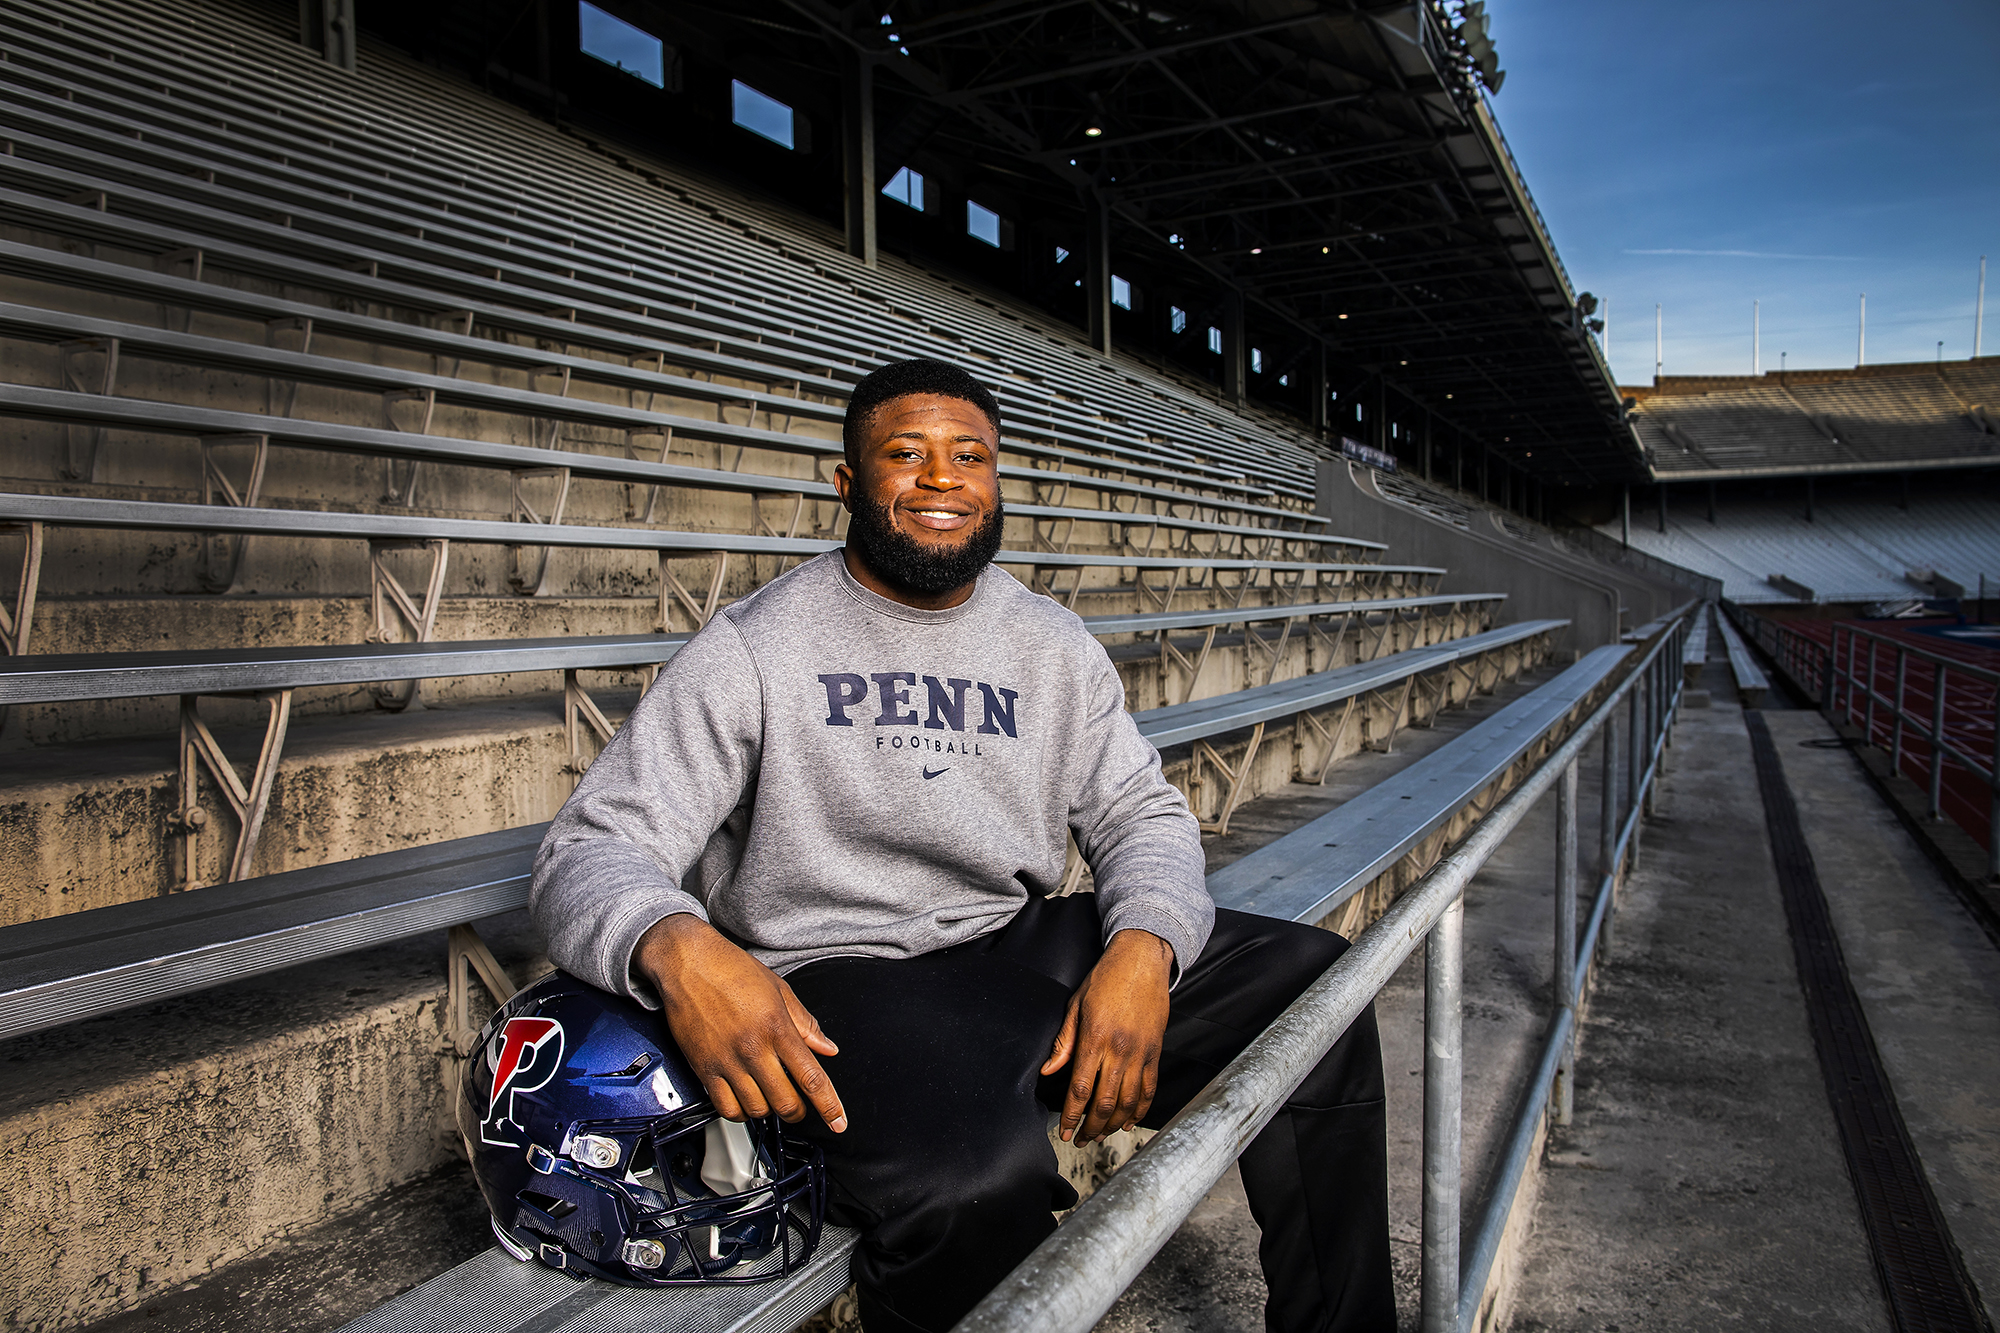 Emili sits in the bleachers at Franklin Field with his arm on a Penn helmet.